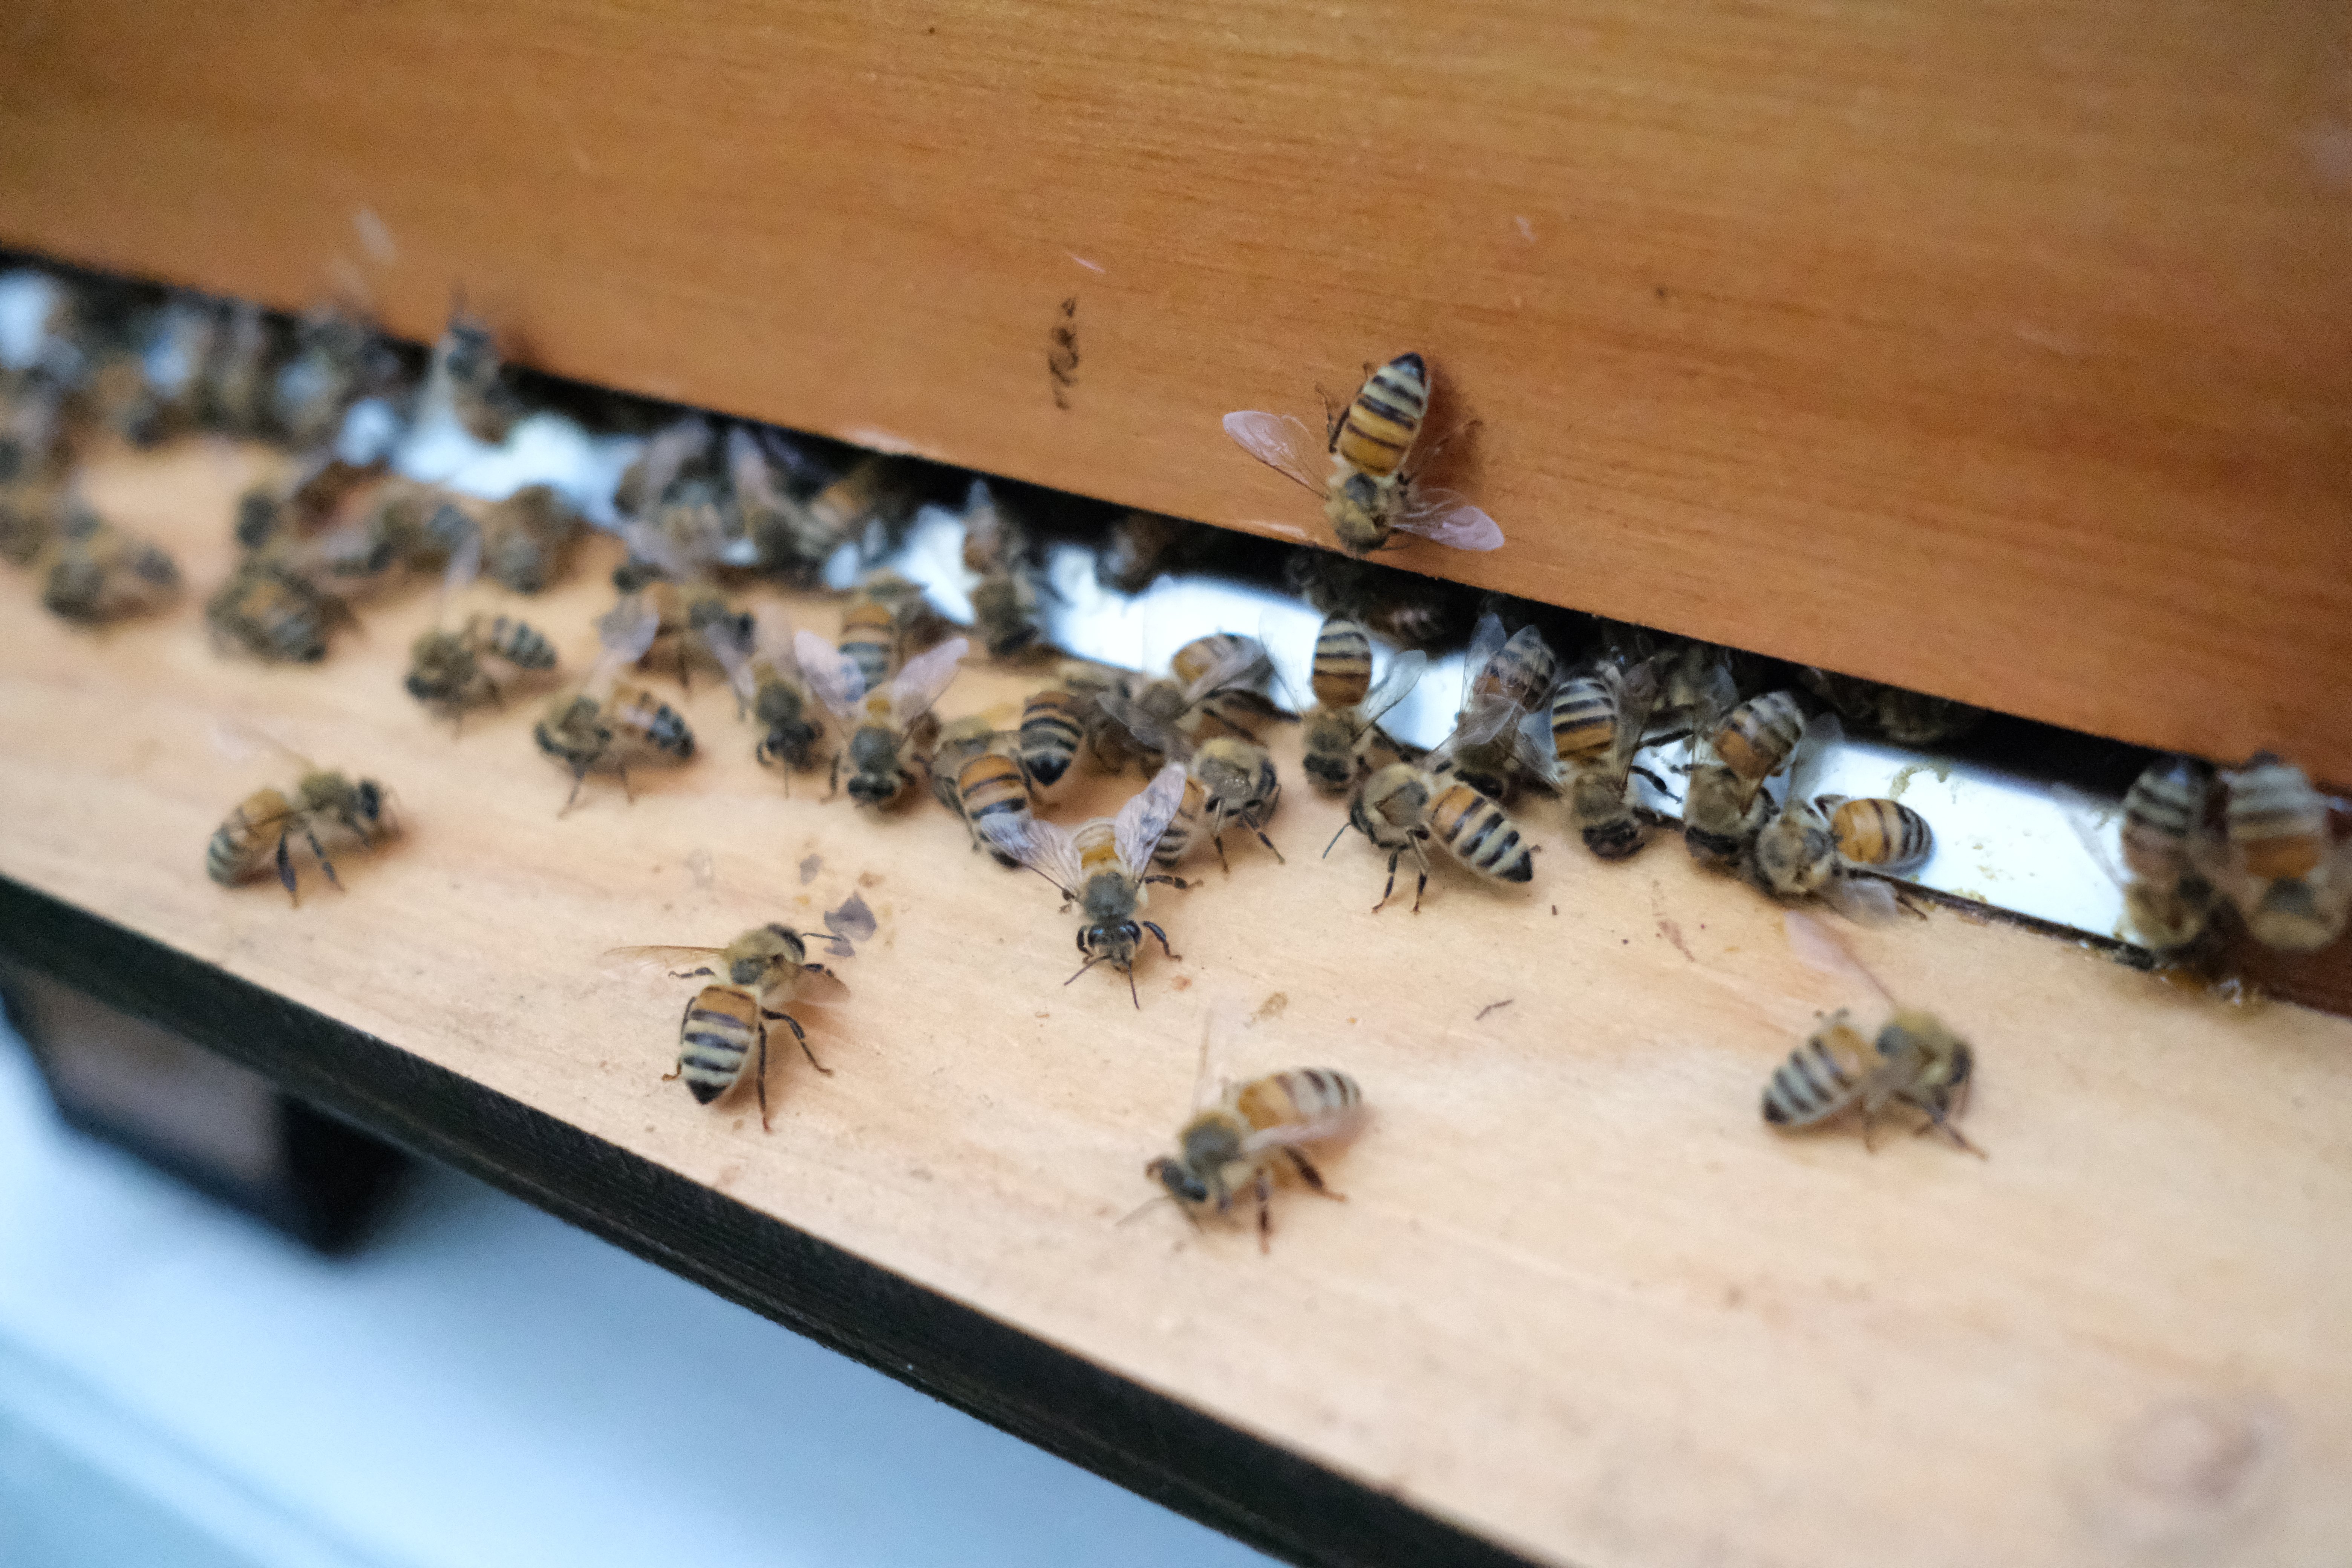 Sweet News from the SugarCreek Bees